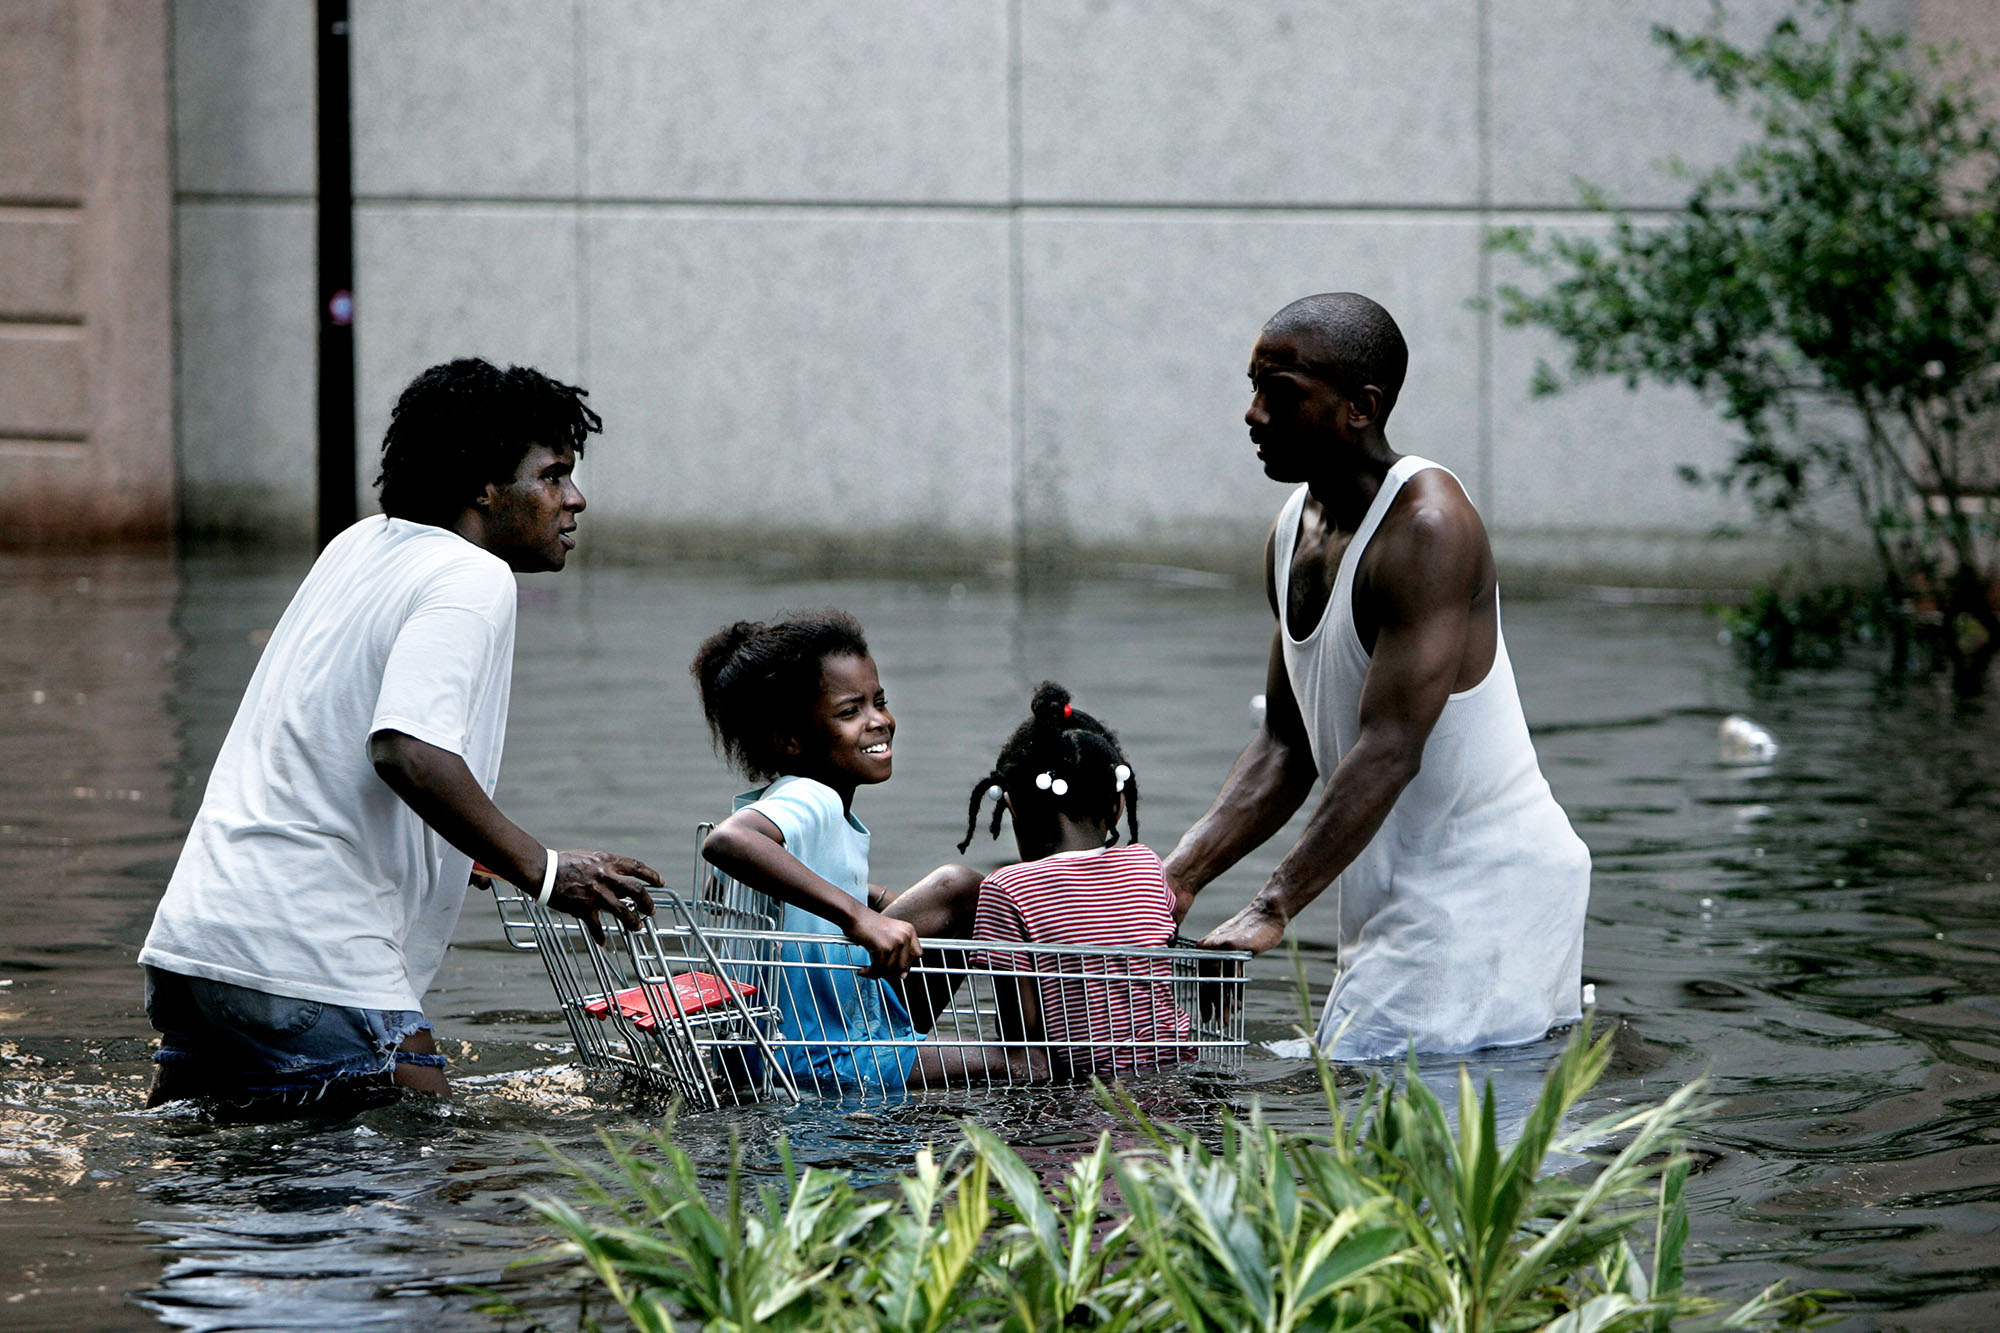 Hurricane Katrina flooded 80% of New Orleans in 2005.